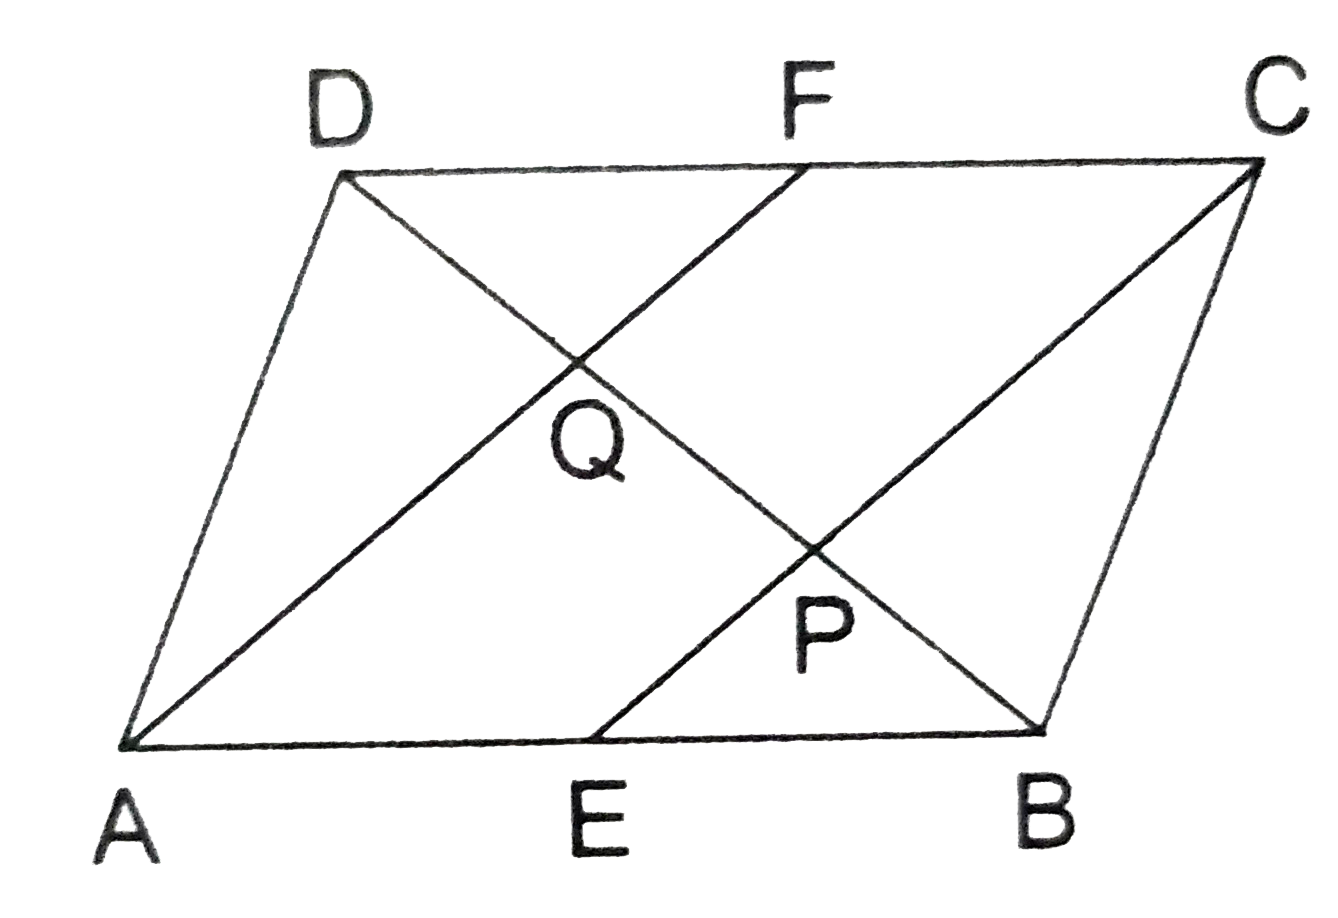 ABCD is a parallelogram in which E and F are the midpoints of the sides AB and CD respectively. Prove that the line segments CE and AF trisect the diagonal BD.